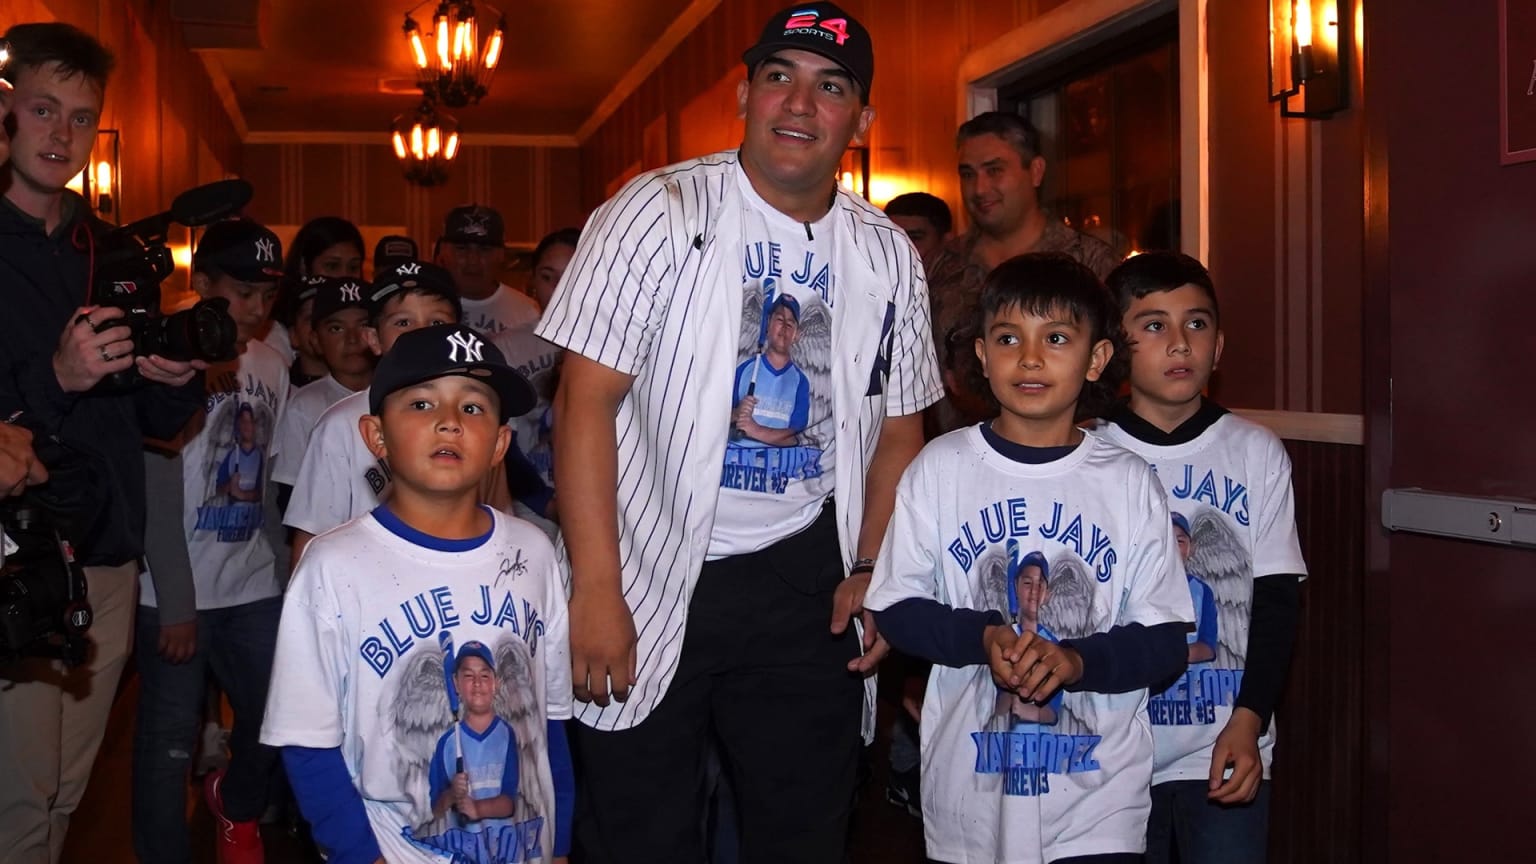 Jose Trevino walking with three young kids